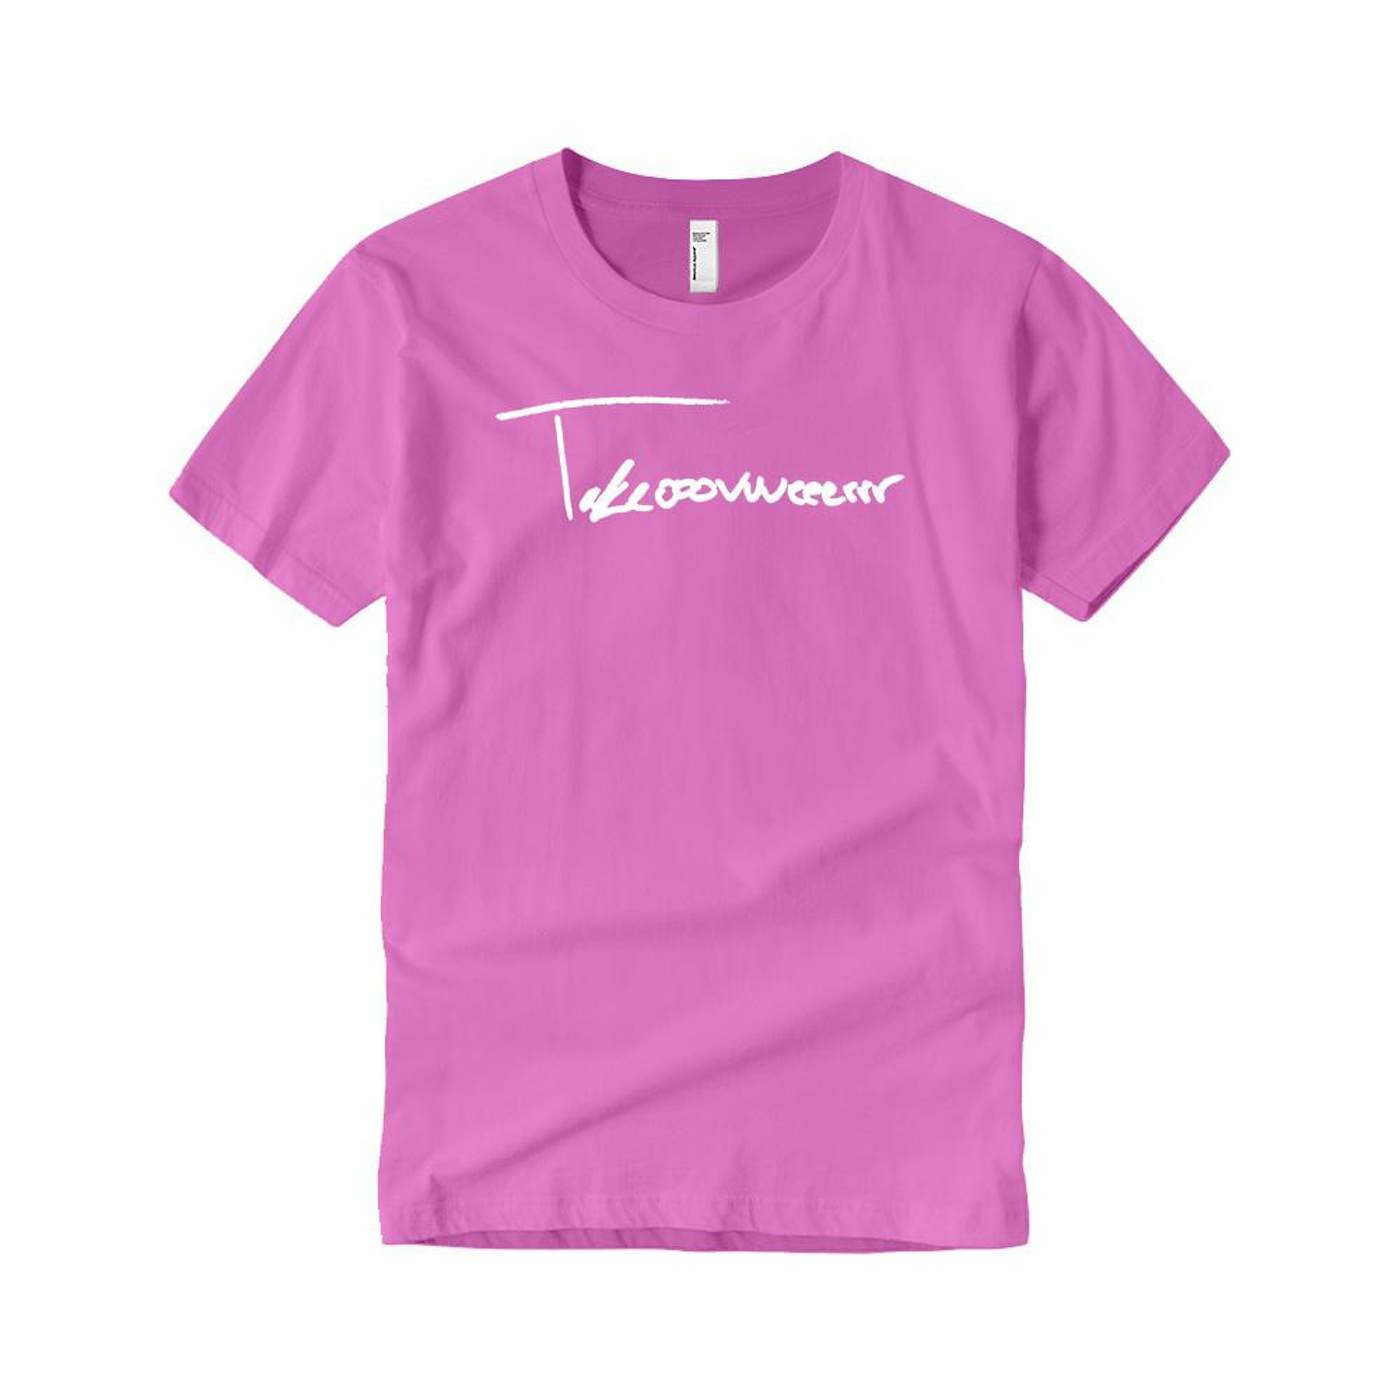 Taylor J Takeover Signature T-Shirt (Pink/White)